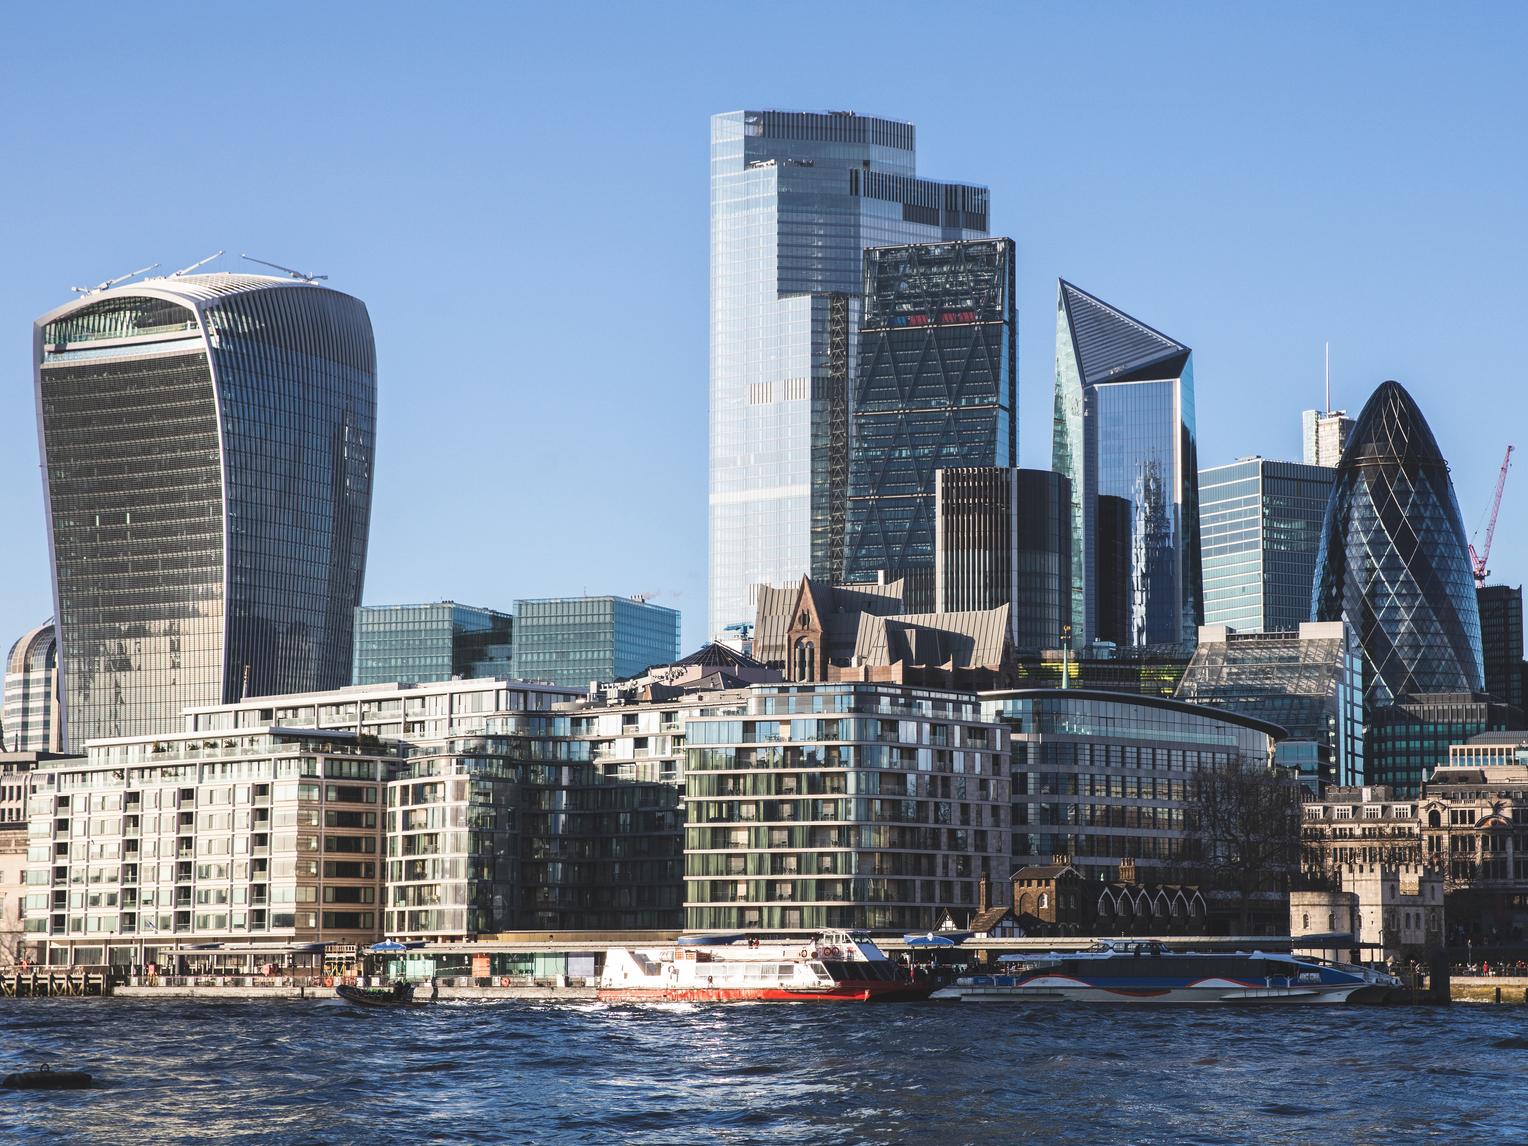 The City of London has lost its beloved dividends and it wants them back